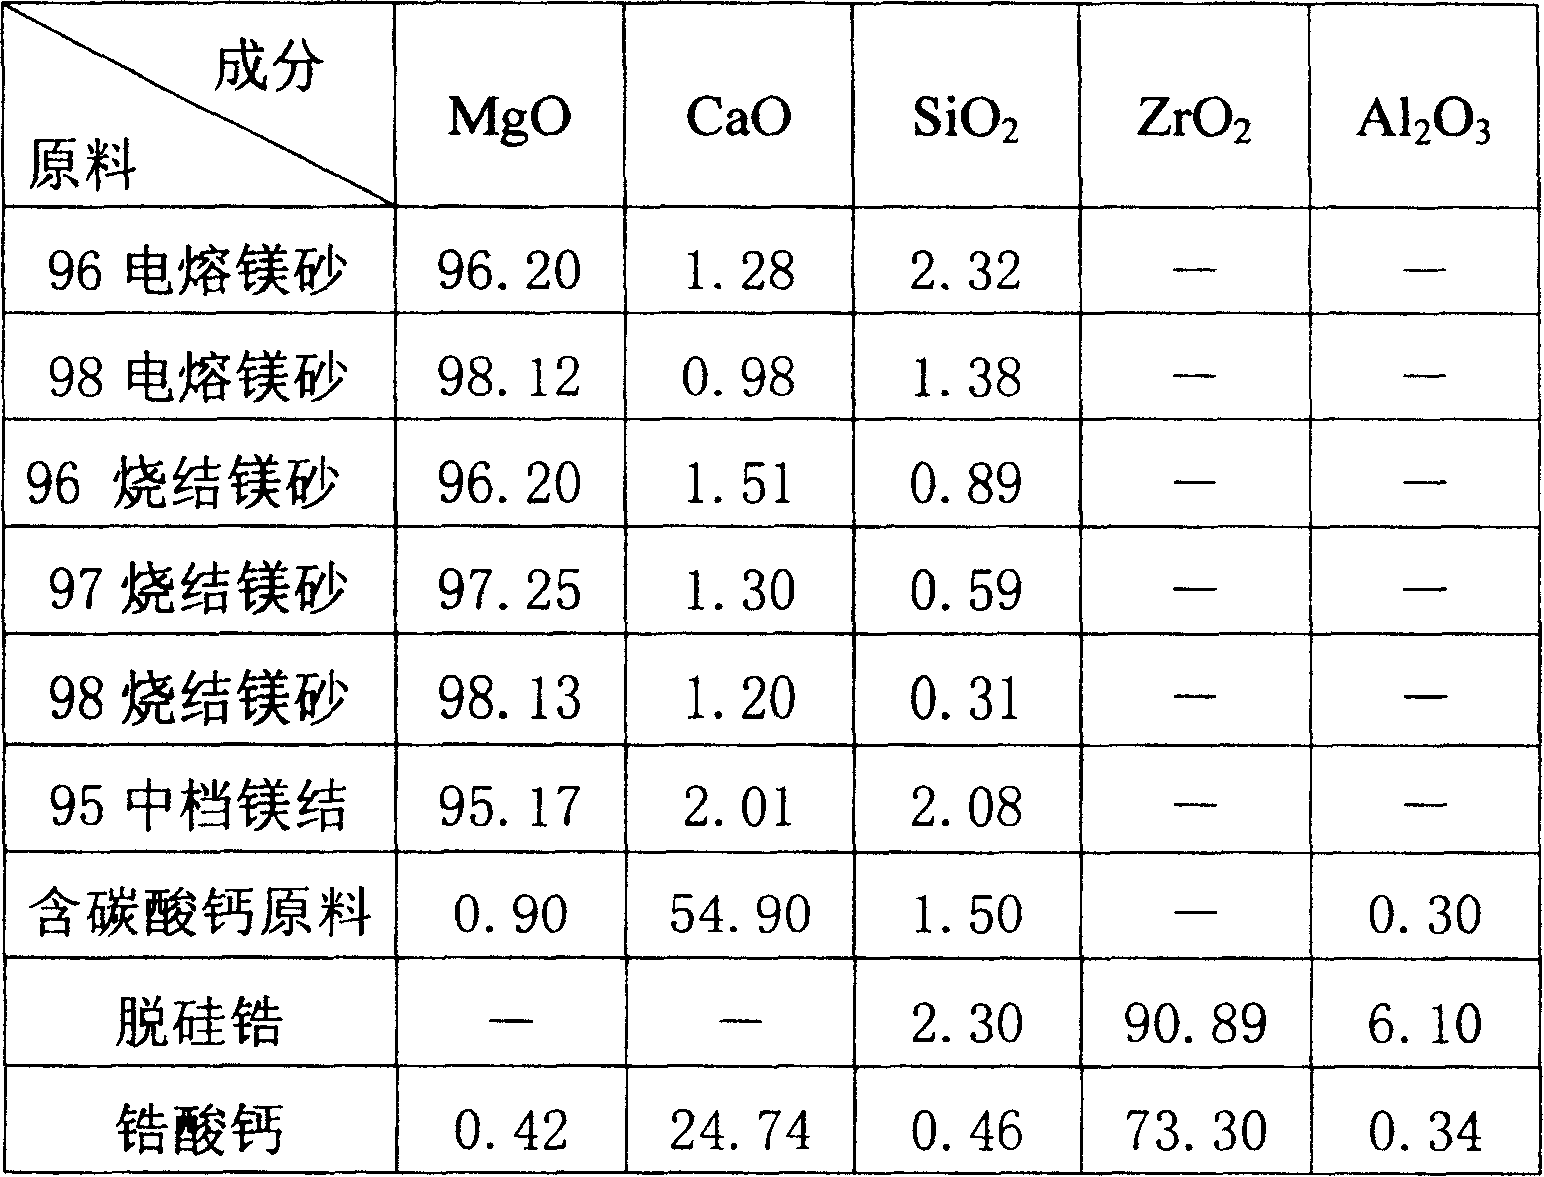 MgO-CaO-ZrO2 brick for cement kiln high-temperature zone and its preparation method